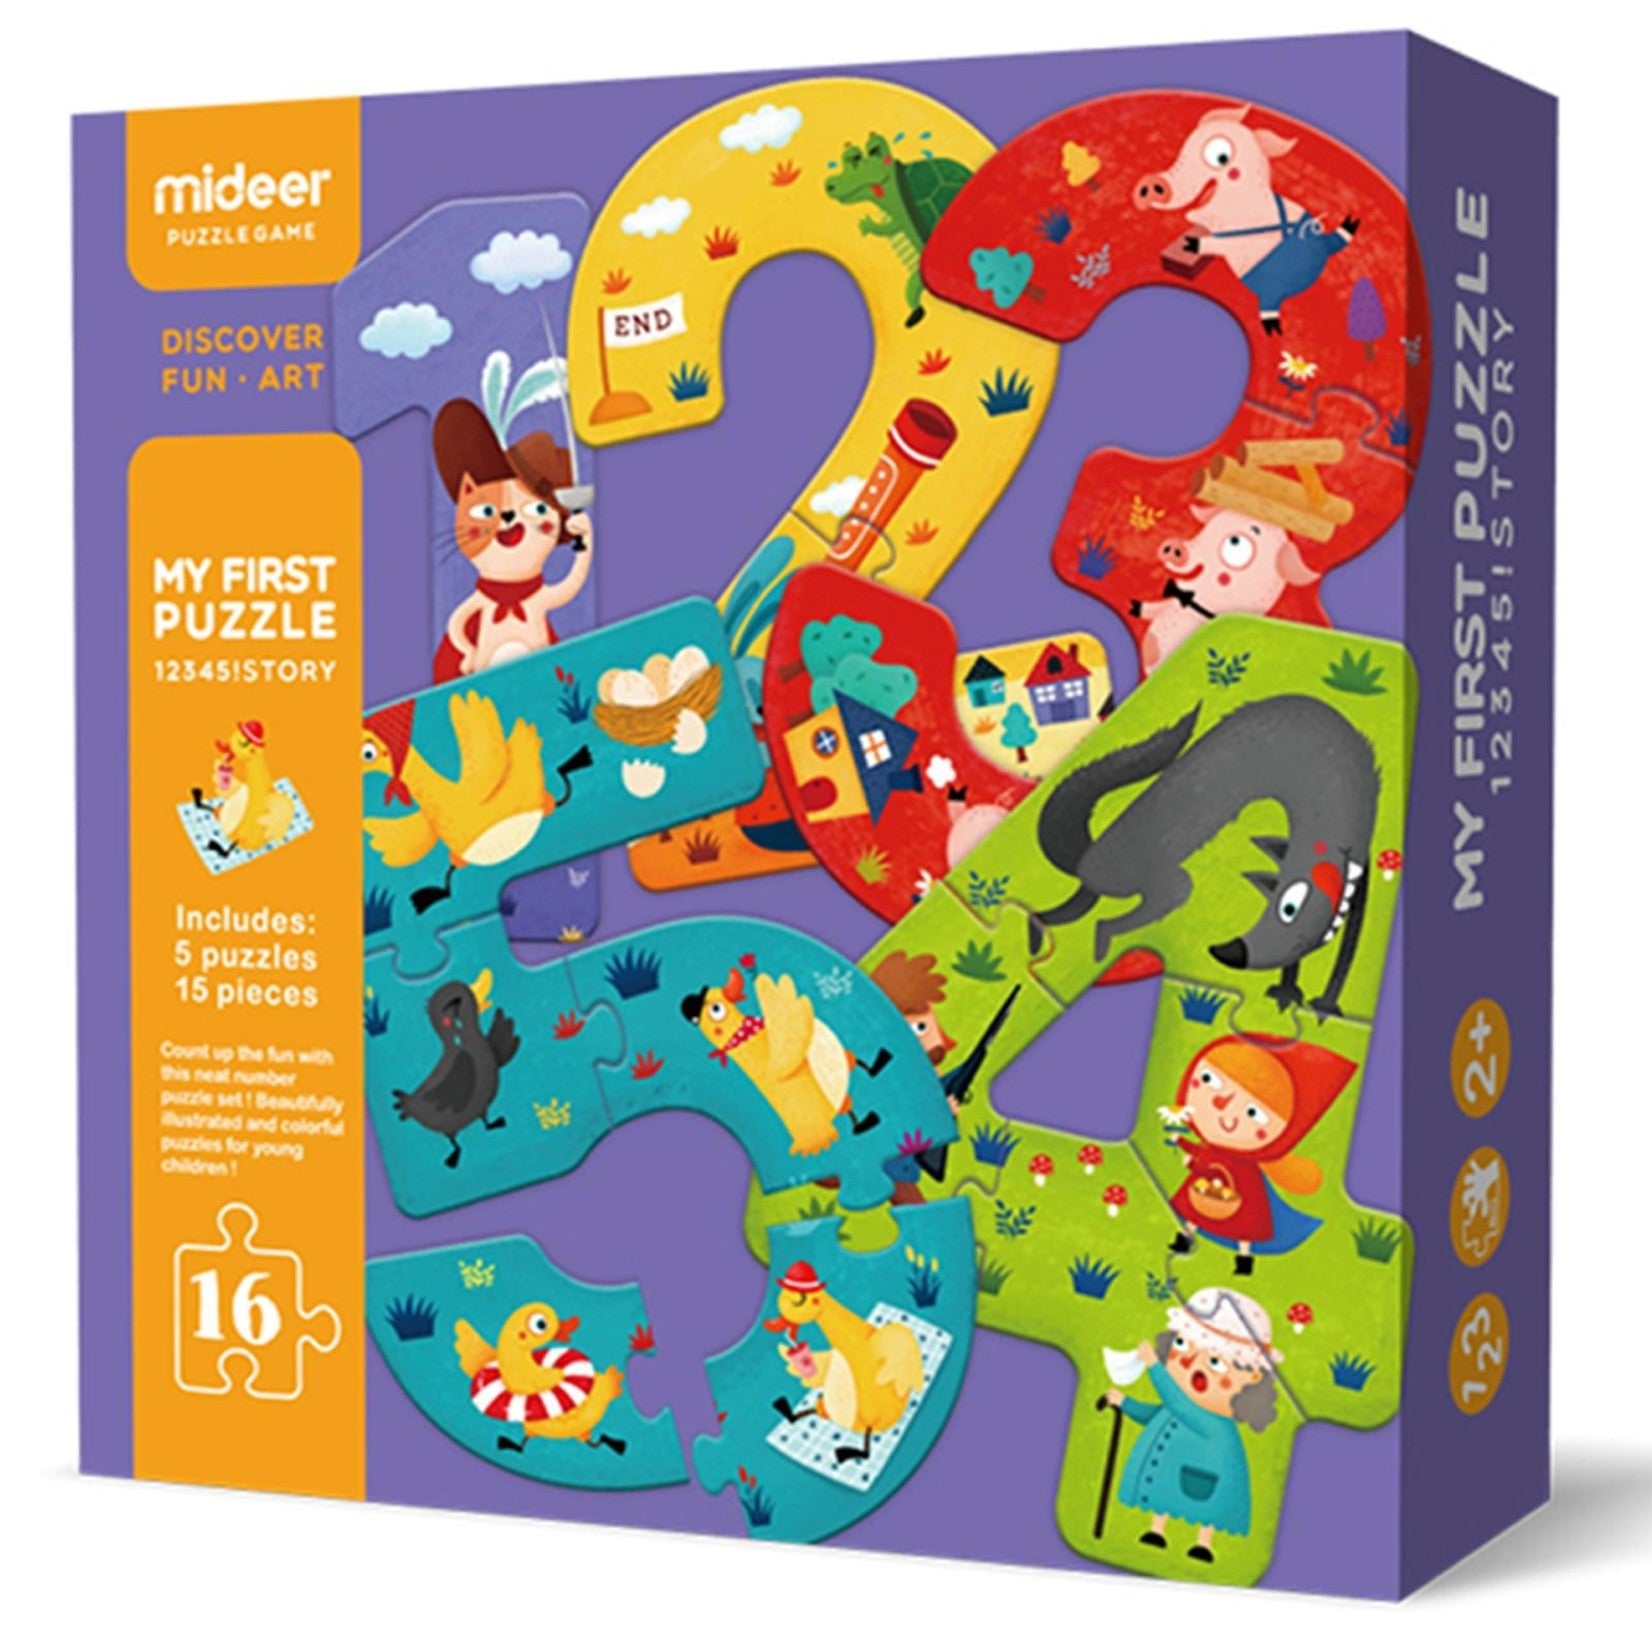 NUMBER PUZZLES - MY FIRST PUZZLE 12345 STORY - 16 PCS